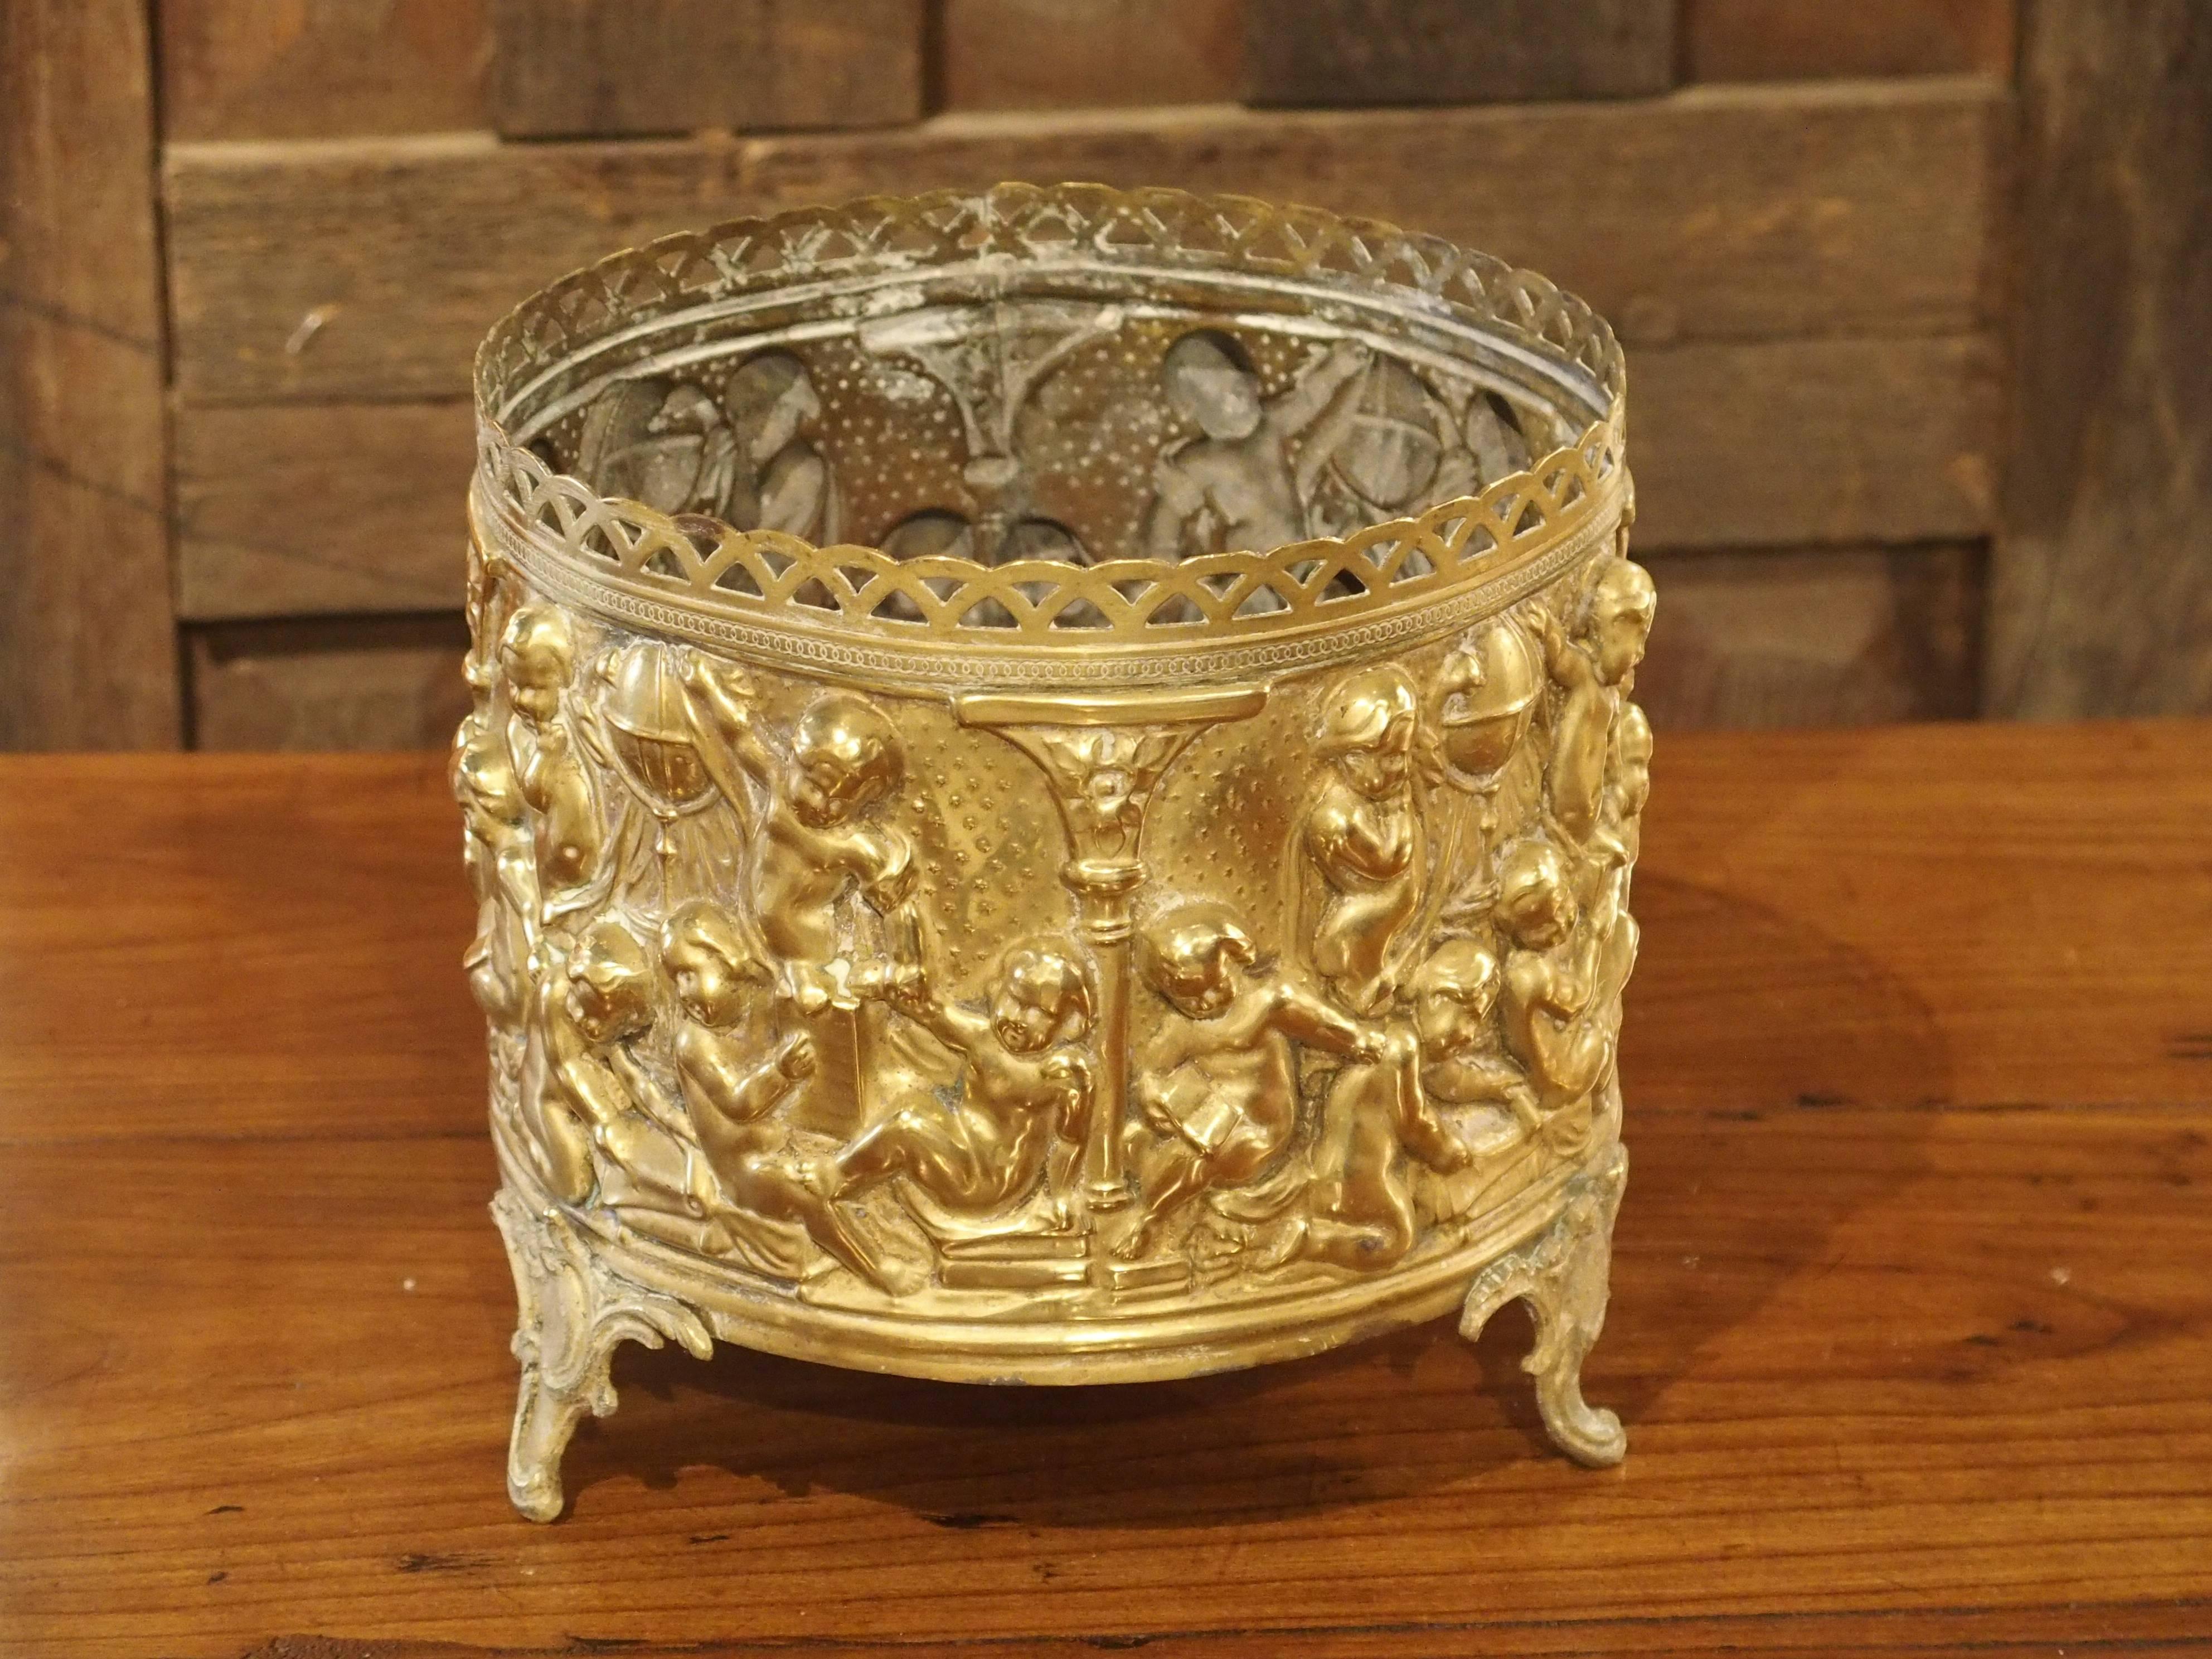 This charming antique French repousse planter depicts putti studying large terrestrial globes, scrolls, and books. It rests upon three foliate feet. A beautiful accessory for any area of the home, the French planter can stand on its own or with